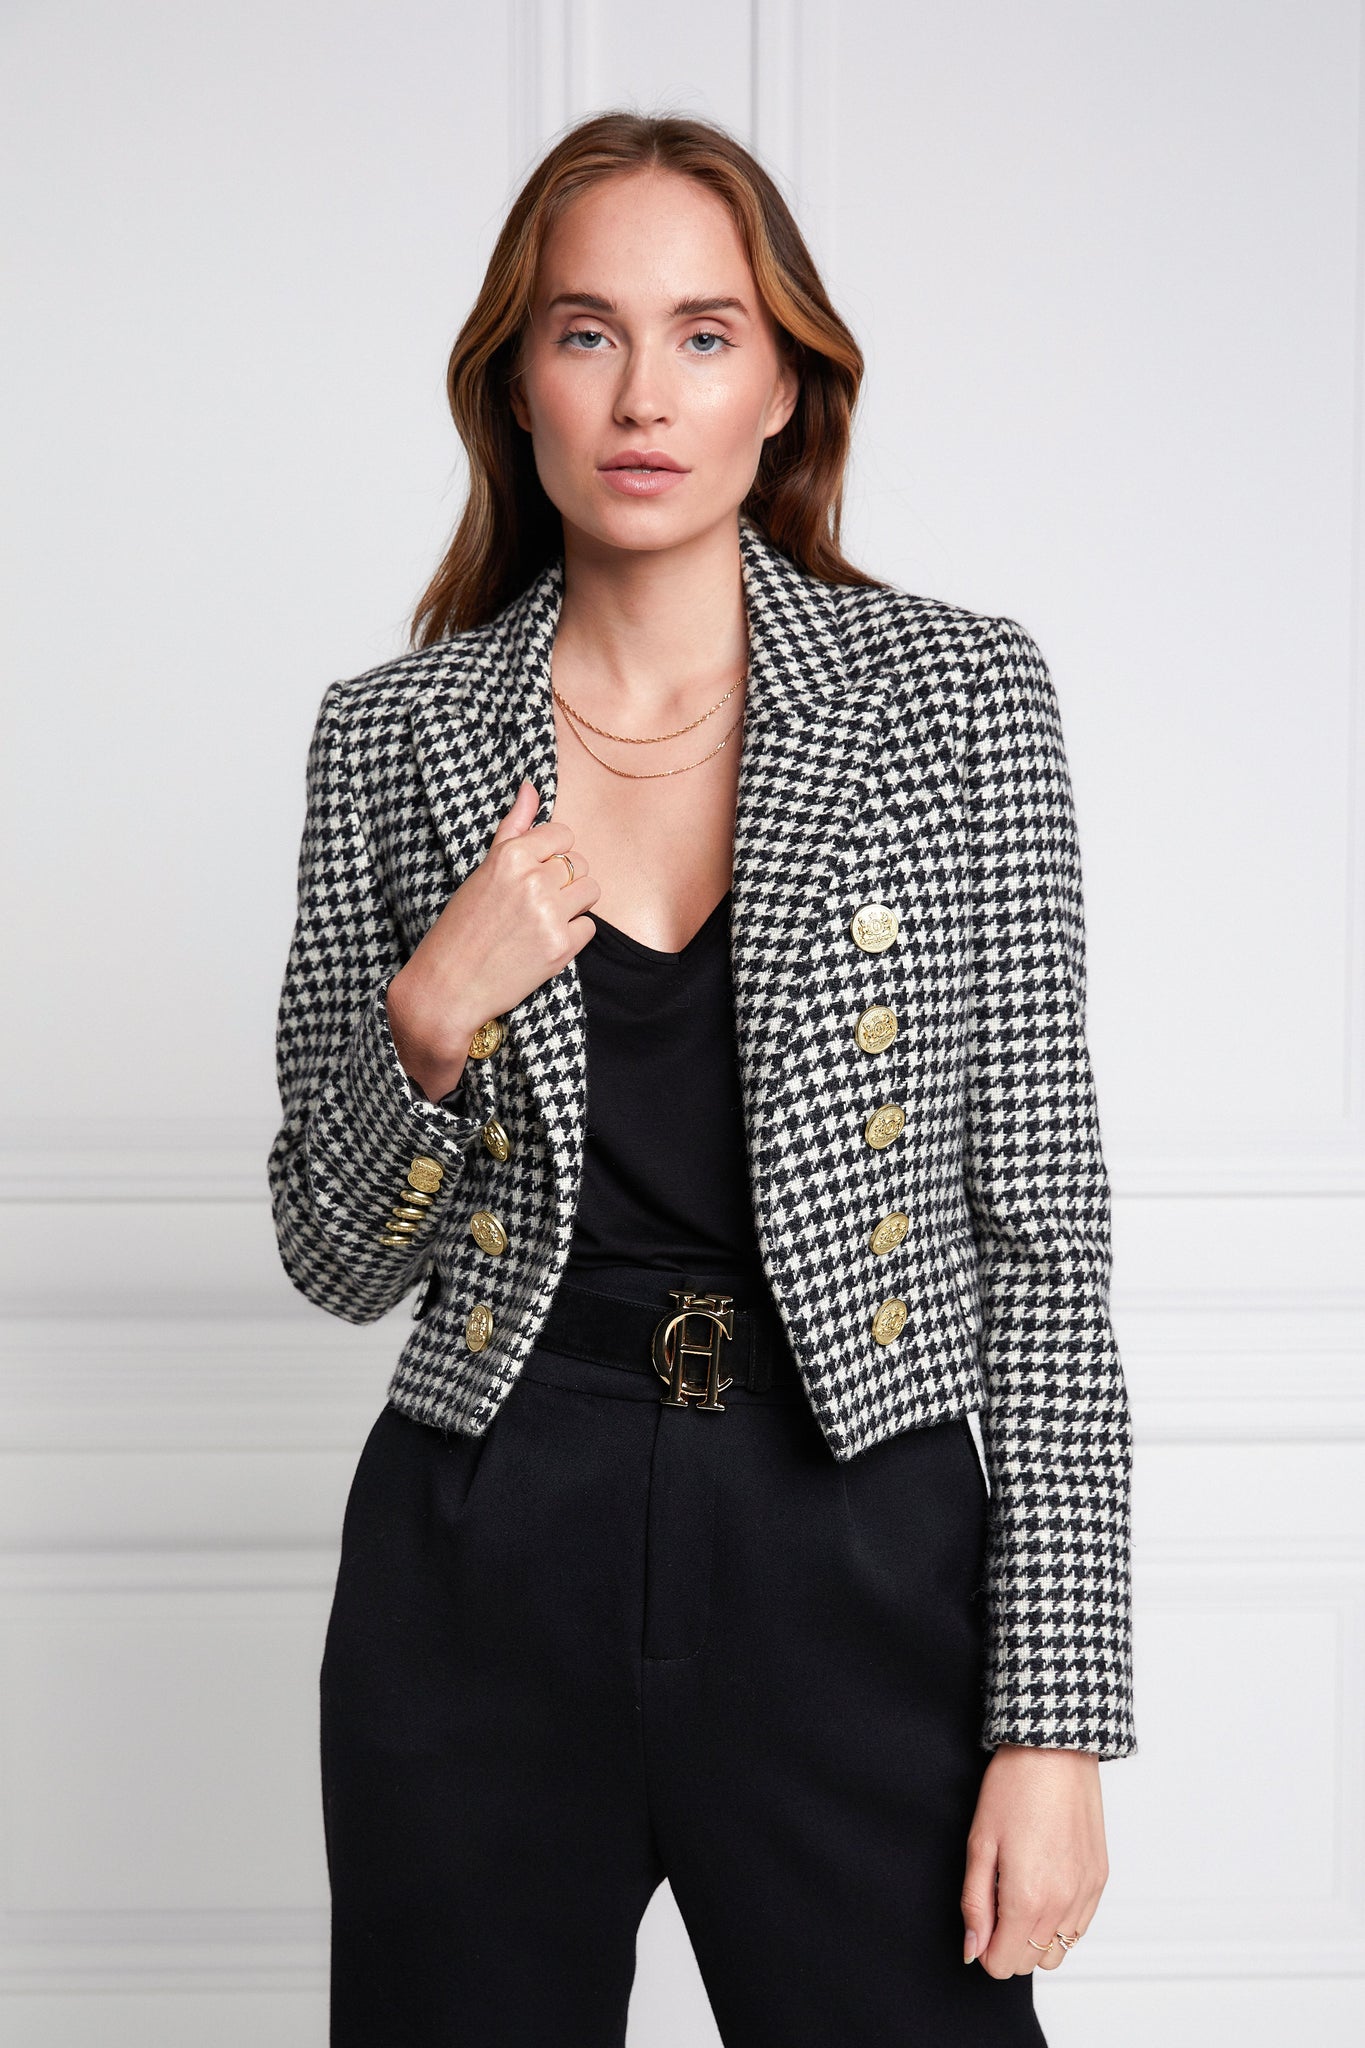 British made tailored cropped jacket in black and white houndstooth with welt pockets and gold button detail down the front and on sleeves